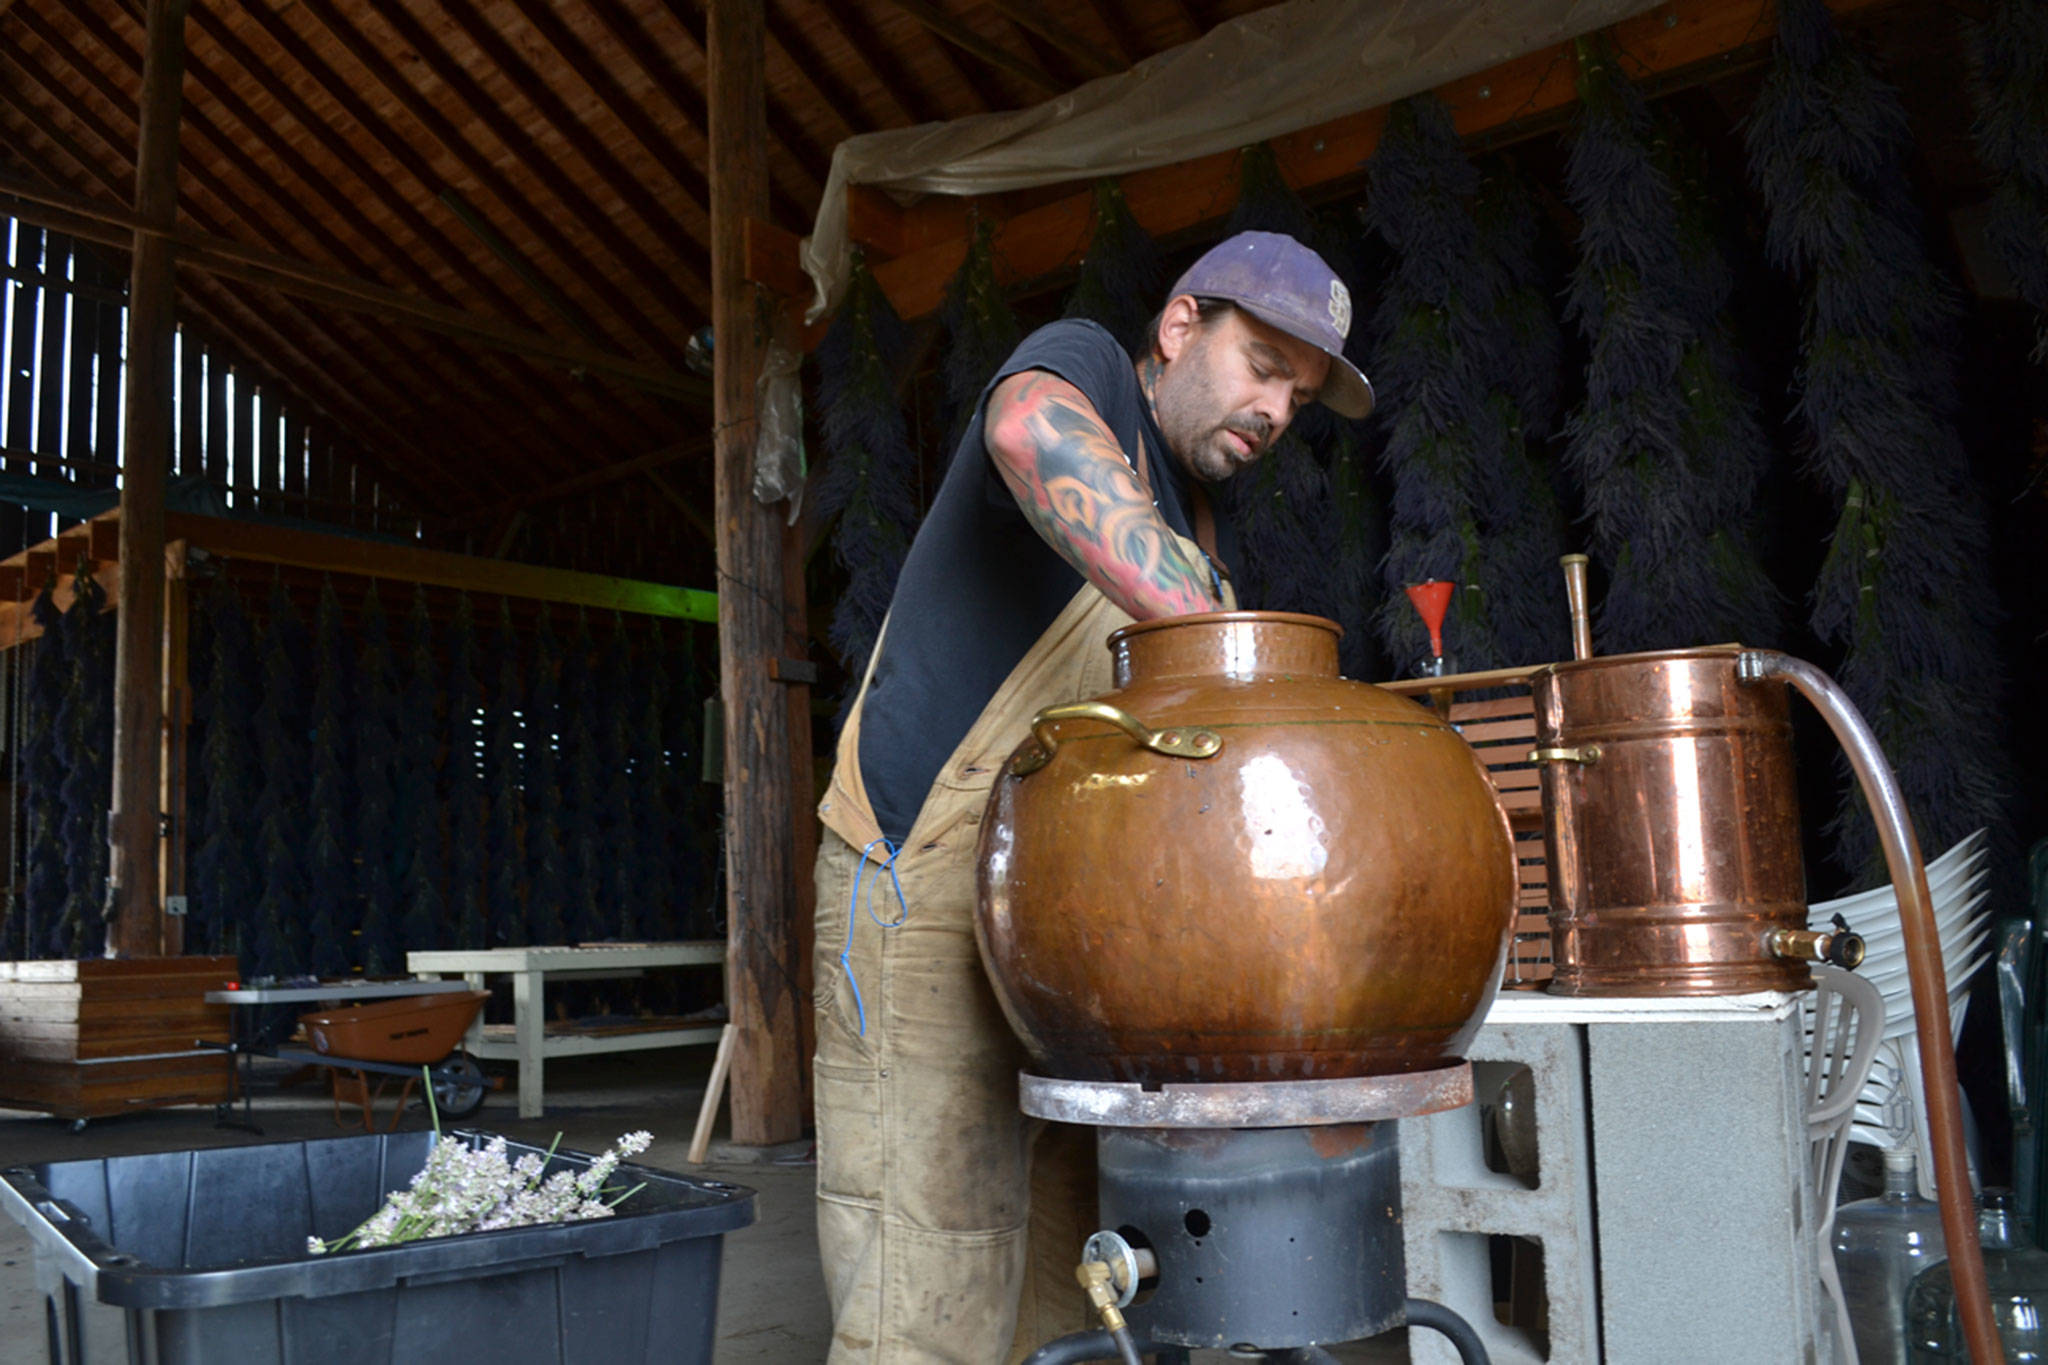 Zion Hilliker, co-owner of B&B Family Farm, readies some lavender for distillation prior to last year’s Sequim Lavender Weekend. The farm’s Hidcote pink lavender and Grosso lavender received gold certification from the U.S. Lavender Oil Awards. Sequim Gazette file photo by Matthew Nash